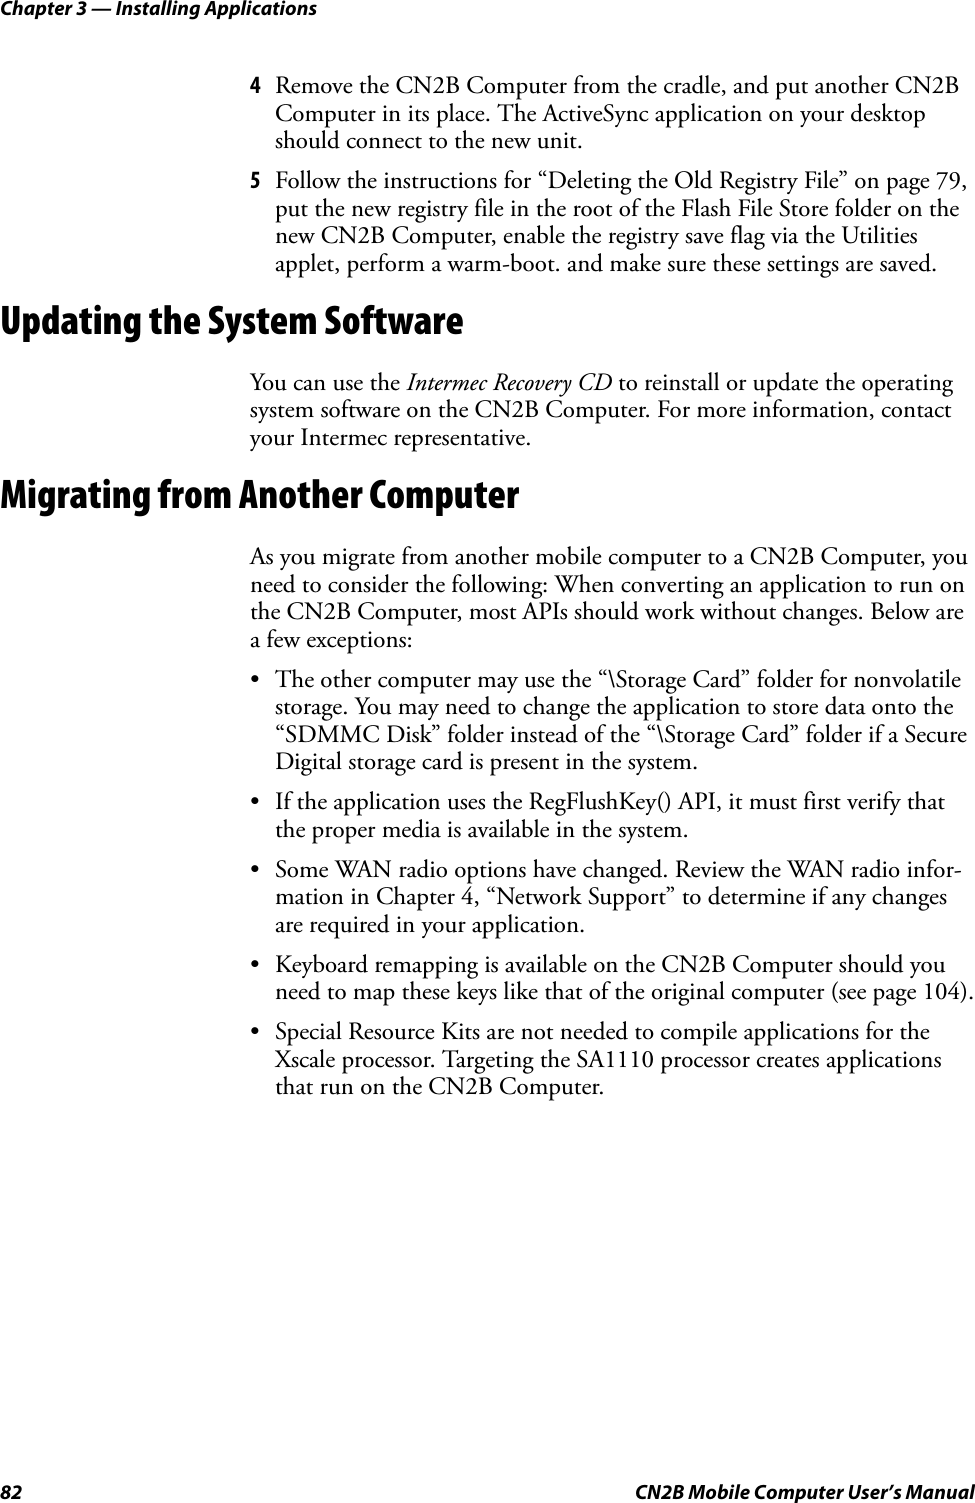 Chapter 3 — Installing Applications82 CN2B Mobile Computer User’s Manual4Remove the CN2B Computer from the cradle, and put another CN2B Computer in its place. The ActiveSync application on your desktop should connect to the new unit. 5Follow the instructions for “Deleting the Old Registry File” on page 79, put the new registry file in the root of the Flash File Store folder on the new CN2B Computer, enable the registry save flag via the Utilities applet, perform a warm-boot. and make sure these settings are saved.Updating the System SoftwareYou can use the Intermec Recovery CD to reinstall or update the operating system software on the CN2B Computer. For more information, contact your Intermec representative.Migrating from Another ComputerAs you migrate from another mobile computer to a CN2B Computer, you need to consider the following: When converting an application to run on the CN2B Computer, most APIs should work without changes. Below are a few exceptions:• The other computer may use the “\Storage Card” folder for nonvolatile storage. You may need to change the application to store data onto the “SDMMC Disk” folder instead of the “\Storage Card” folder if a Secure Digital storage card is present in the system.• If the application uses the RegFlushKey() API, it must first verify that the proper media is available in the system.• Some WAN radio options have changed. Review the WAN radio infor-mation in Chapter 4, “Network Support” to determine if any changes are required in your application.• Keyboard remapping is available on the CN2B Computer should you need to map these keys like that of the original computer (see page 104).• Special Resource Kits are not needed to compile applications for the Xscale processor. Targeting the SA1110 processor creates applications that run on the CN2B Computer.